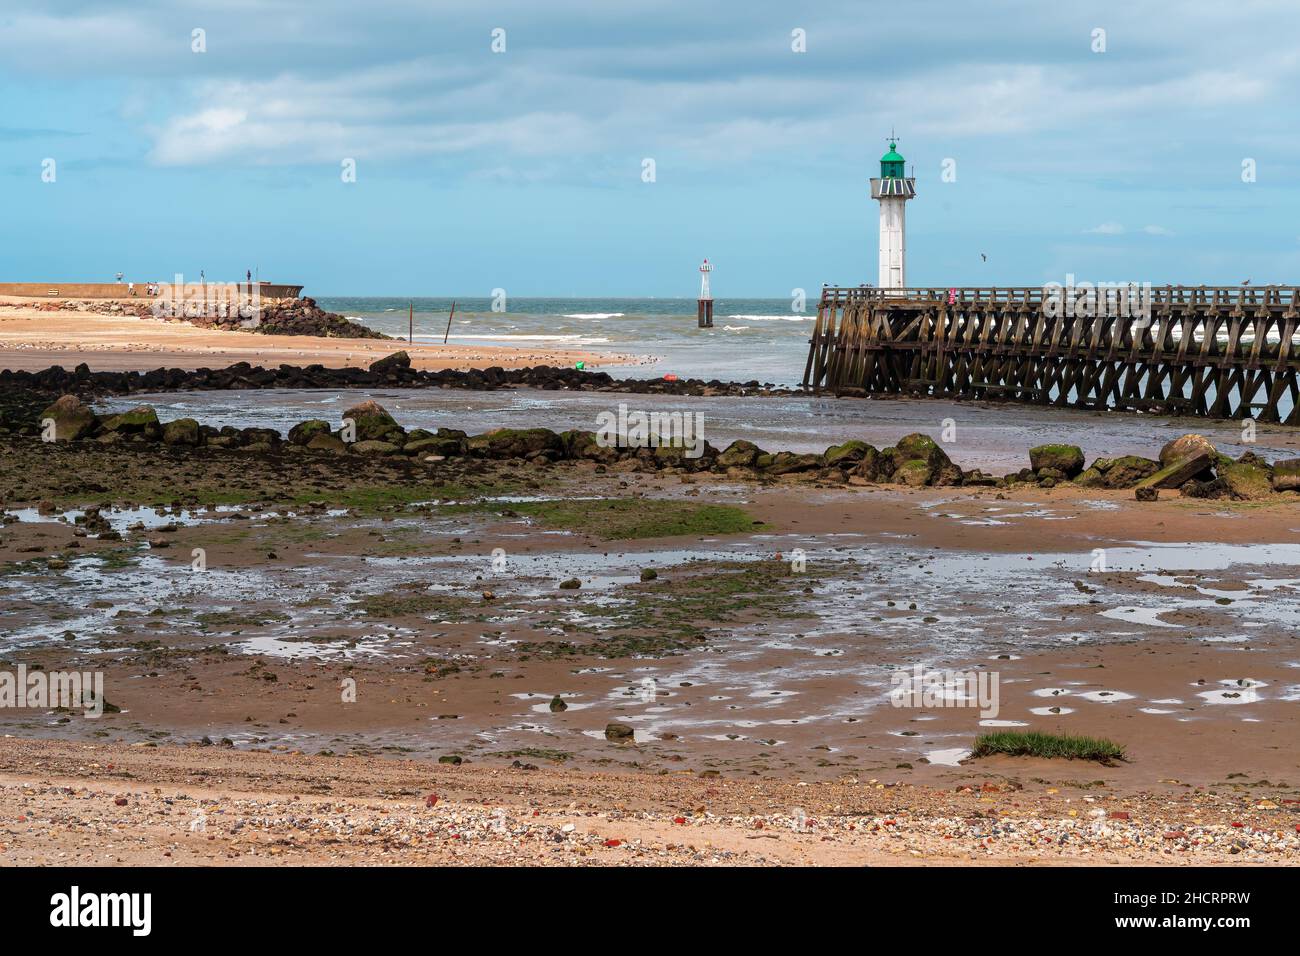 Deauville-Trouville, France - August 6, 2021: Sea Lighthouse on the Atlantic coast at the resort of Deauville-Trouville Stock Photo